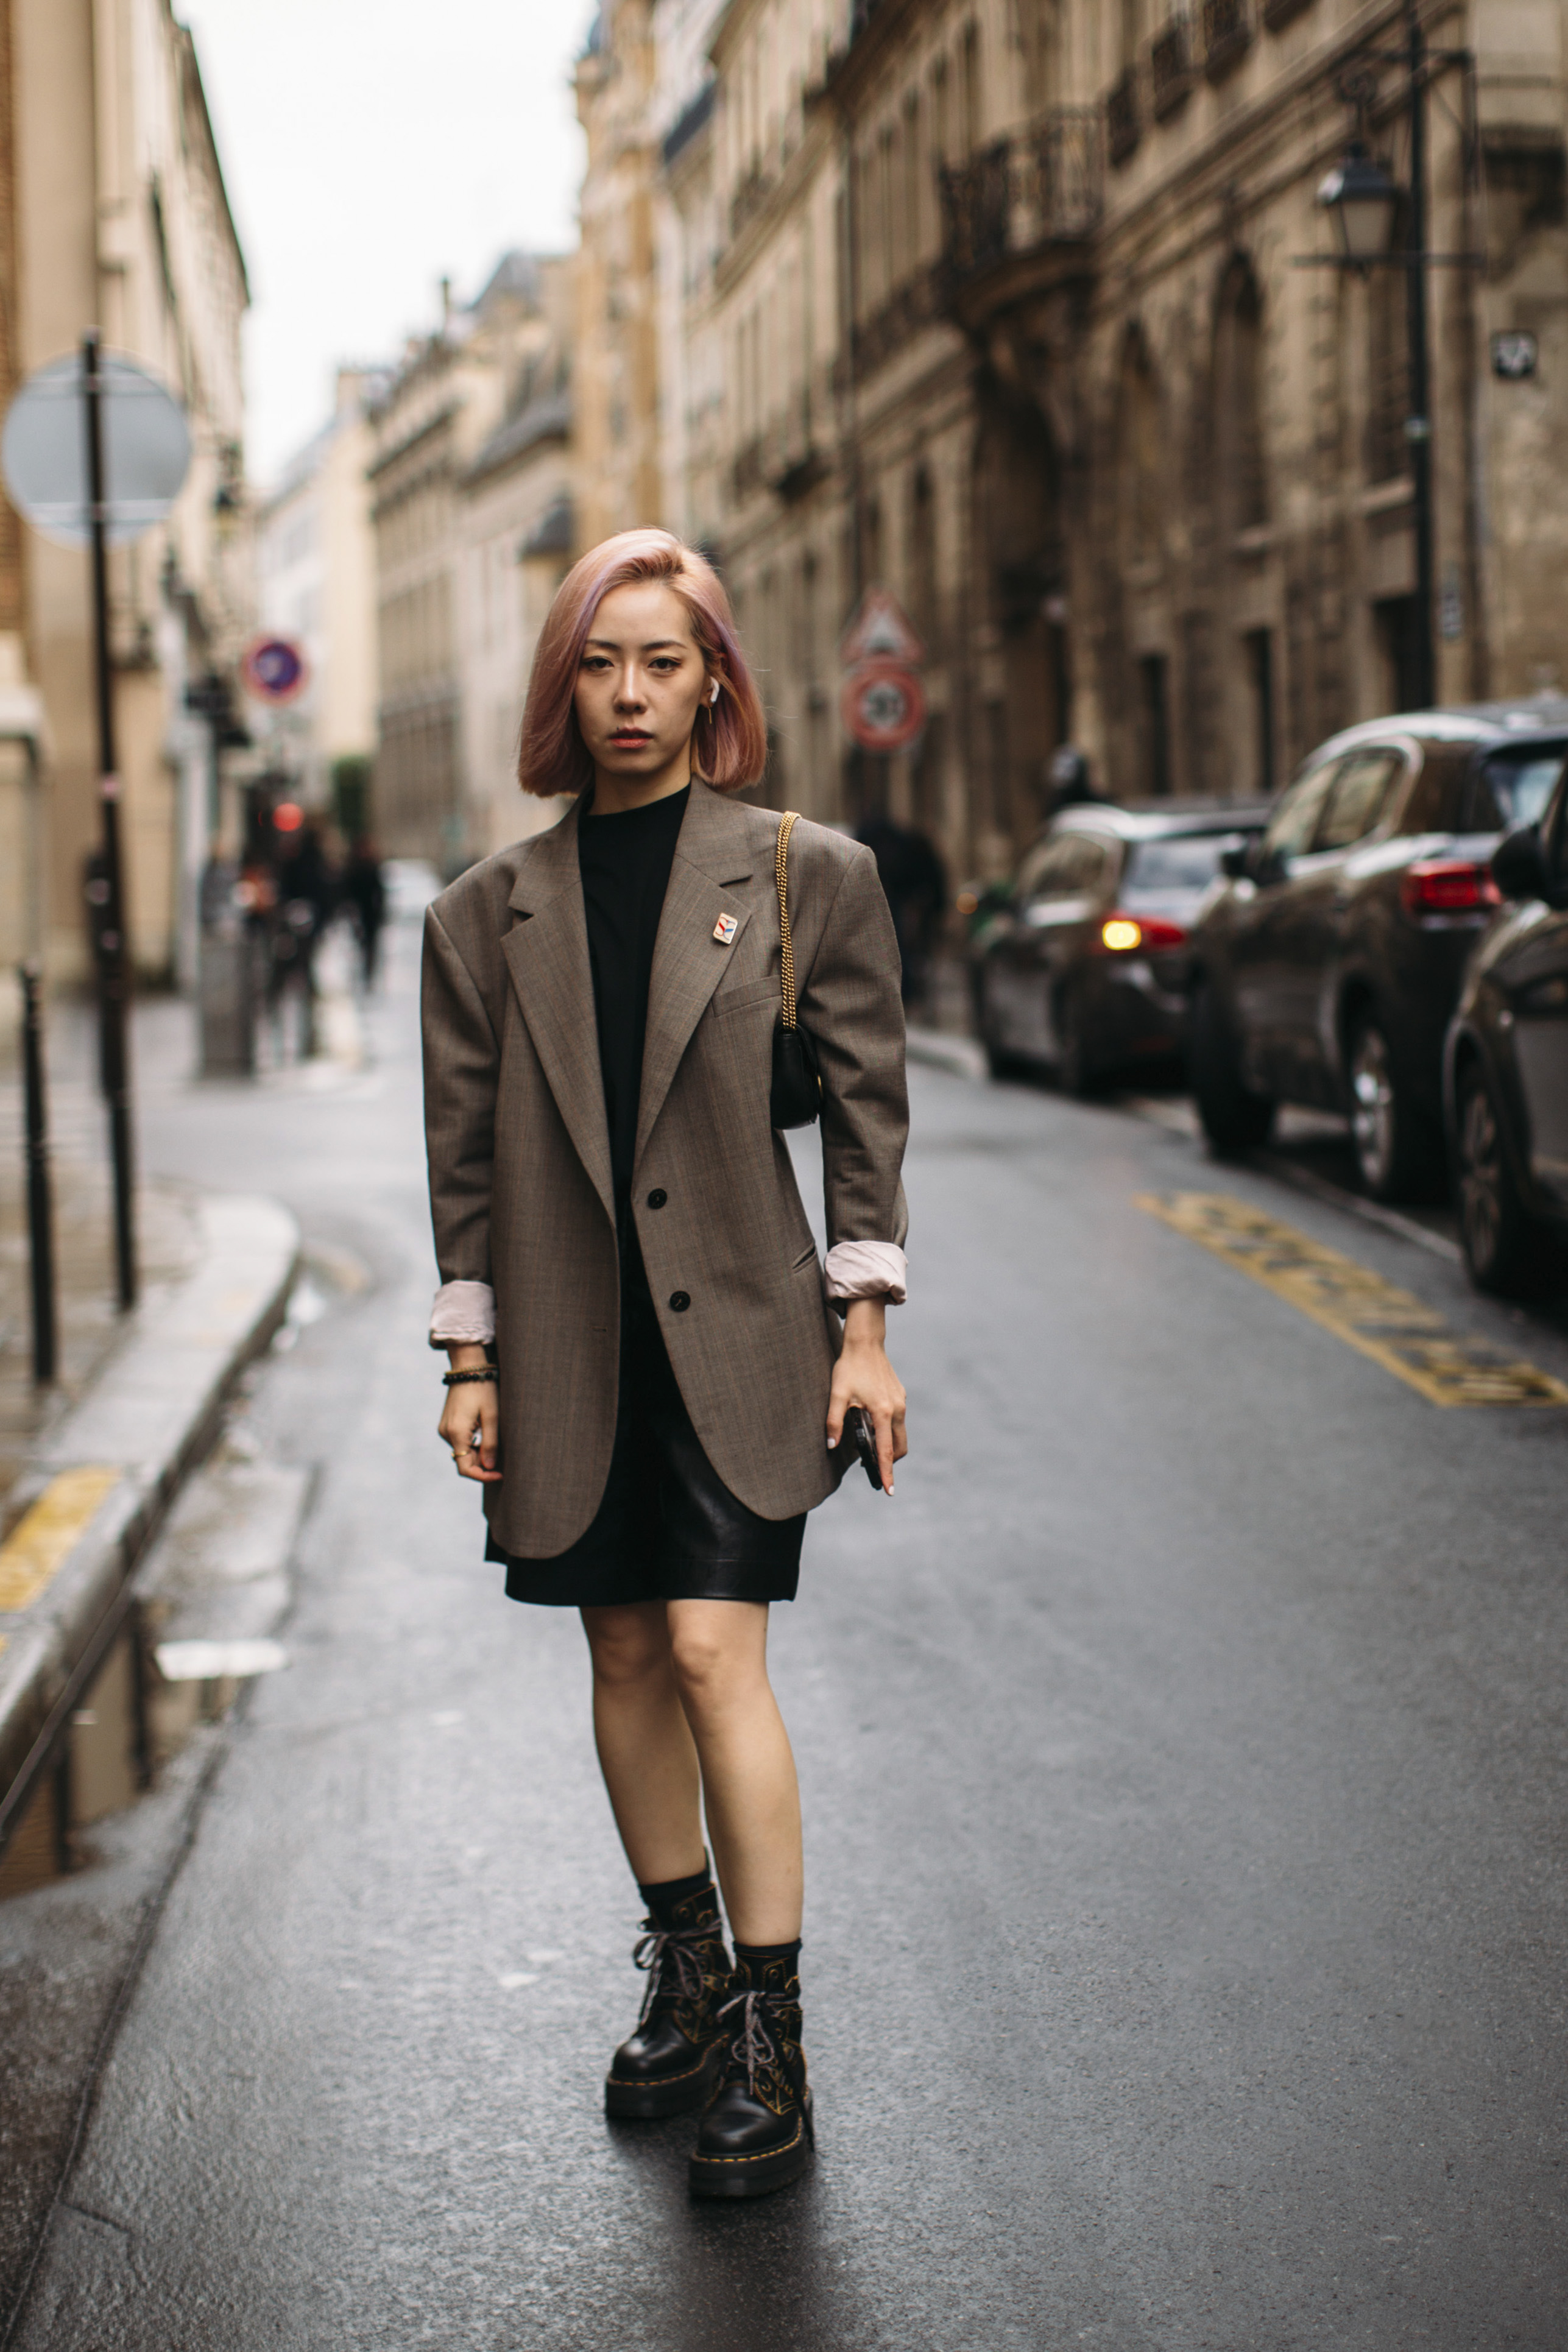 Combining white Dr. Martens with a trench coat